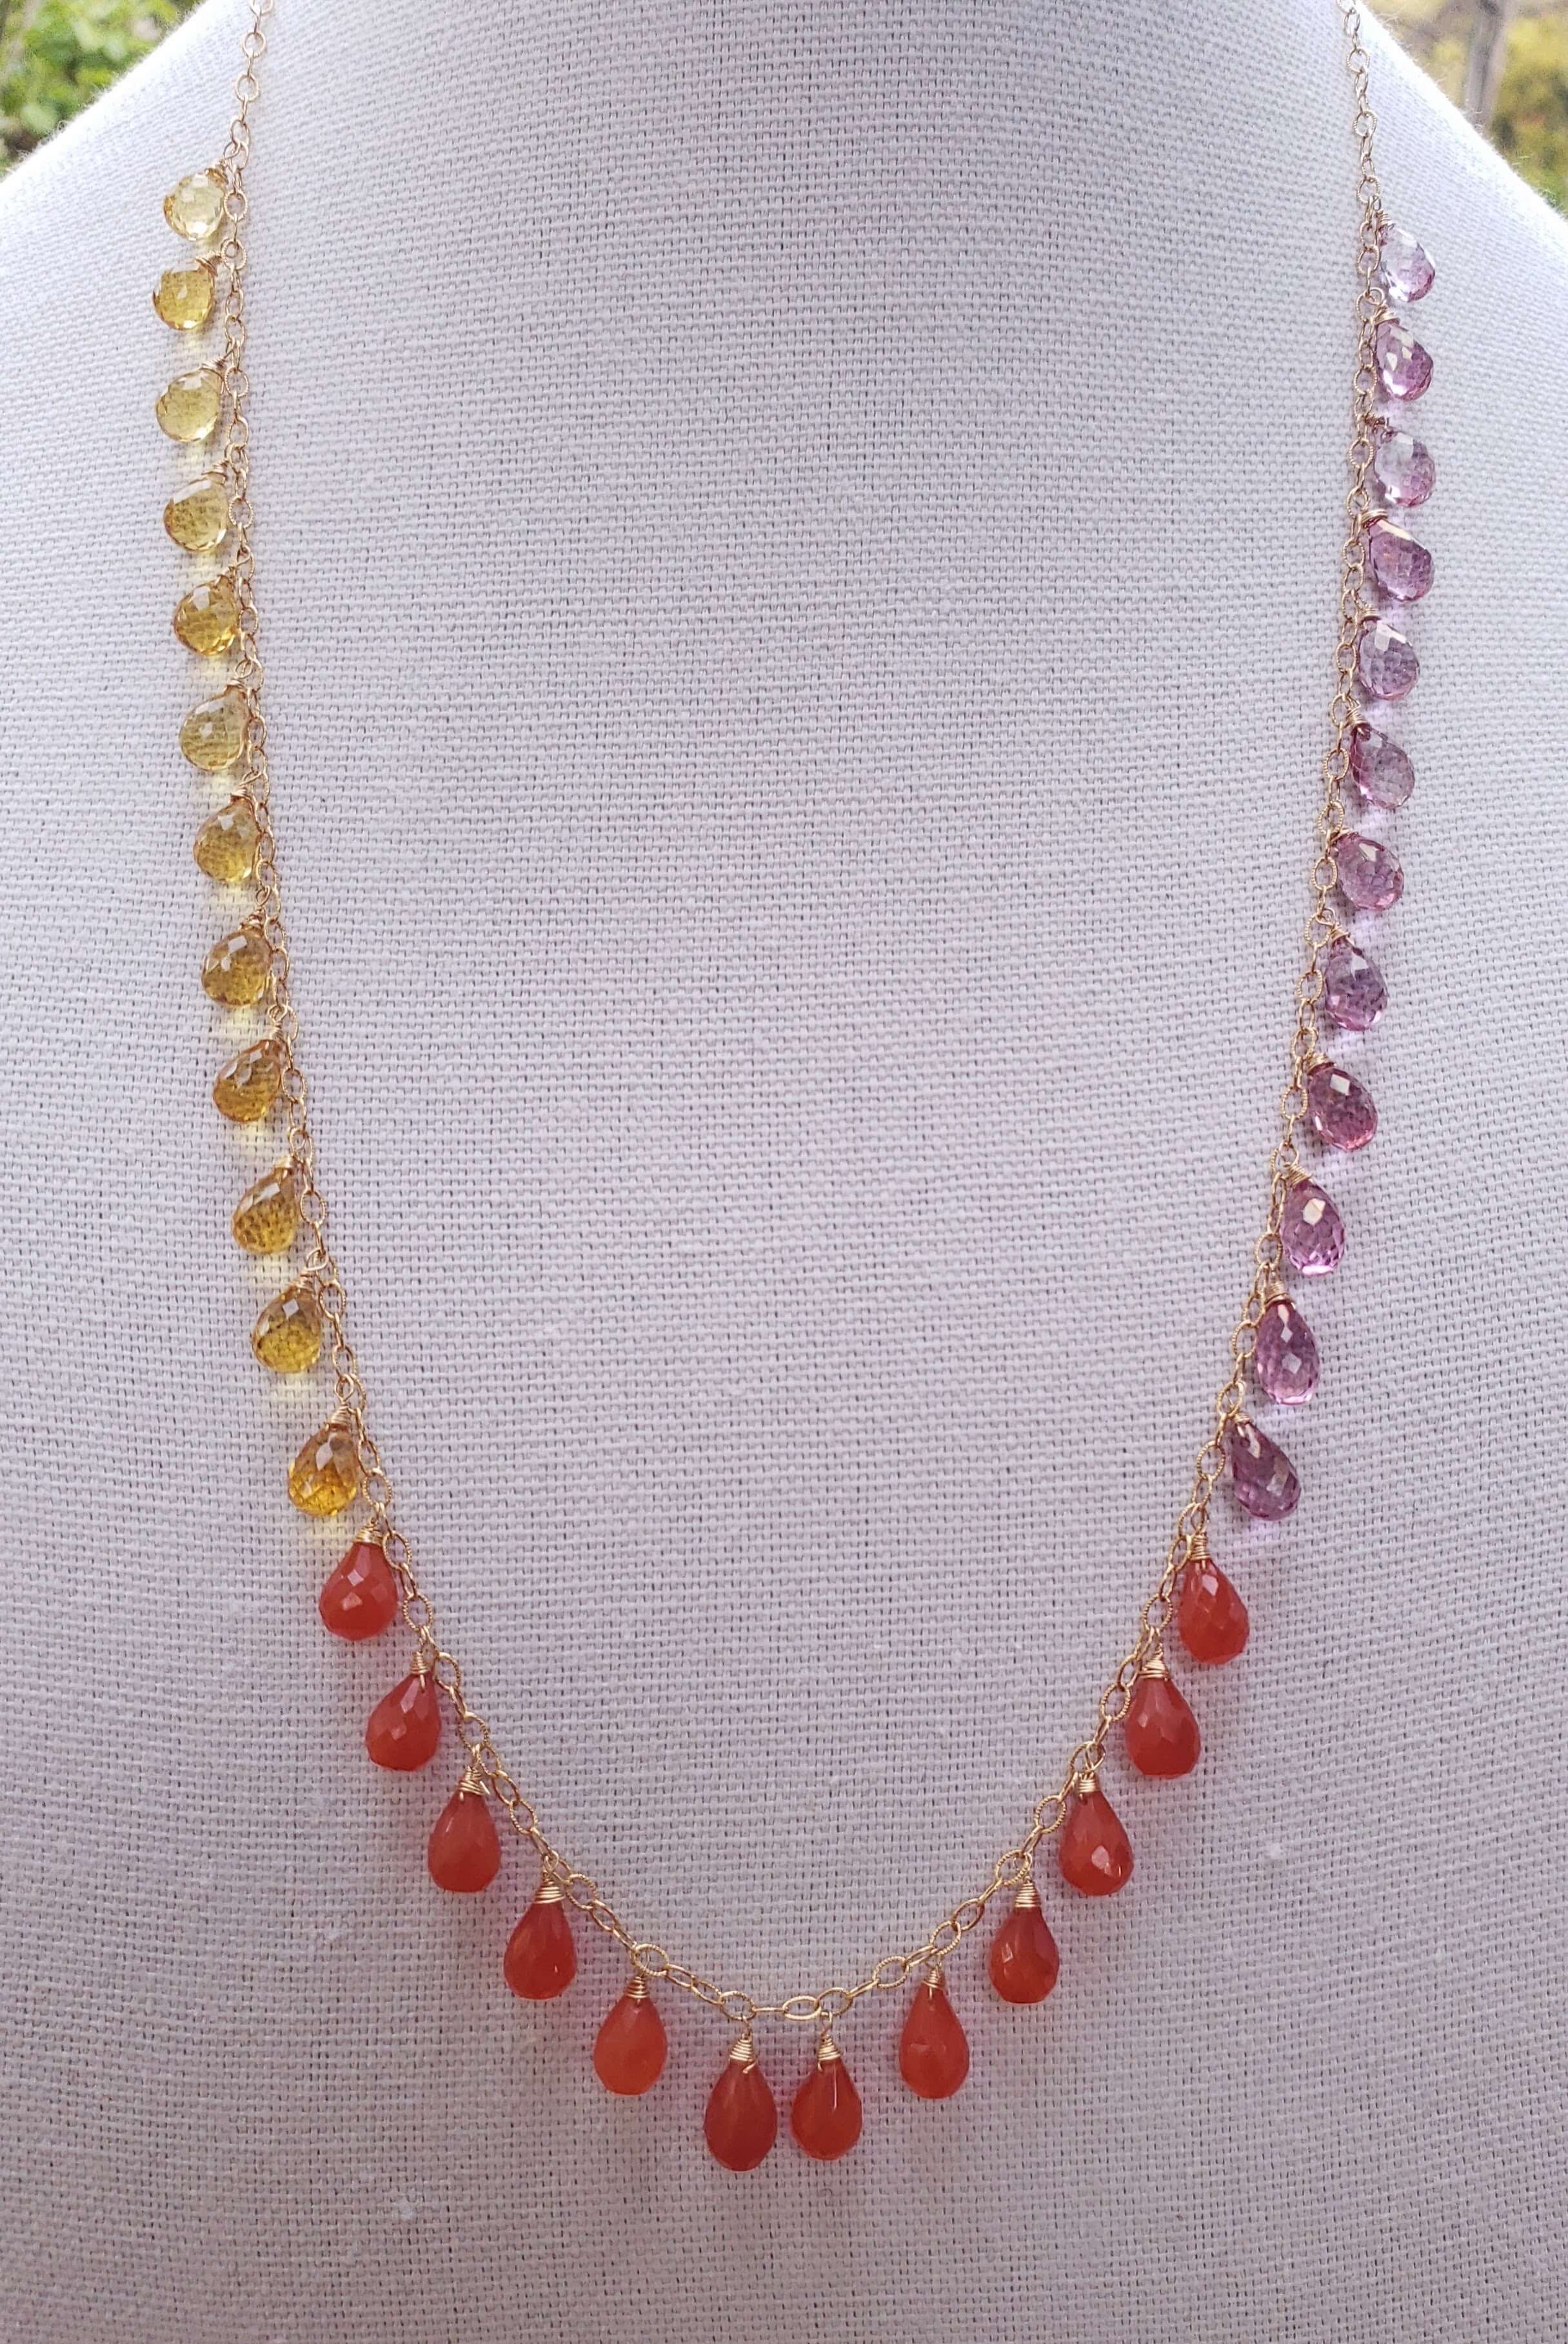 Carnelian, Citrine and Pink Amethyst Necklace